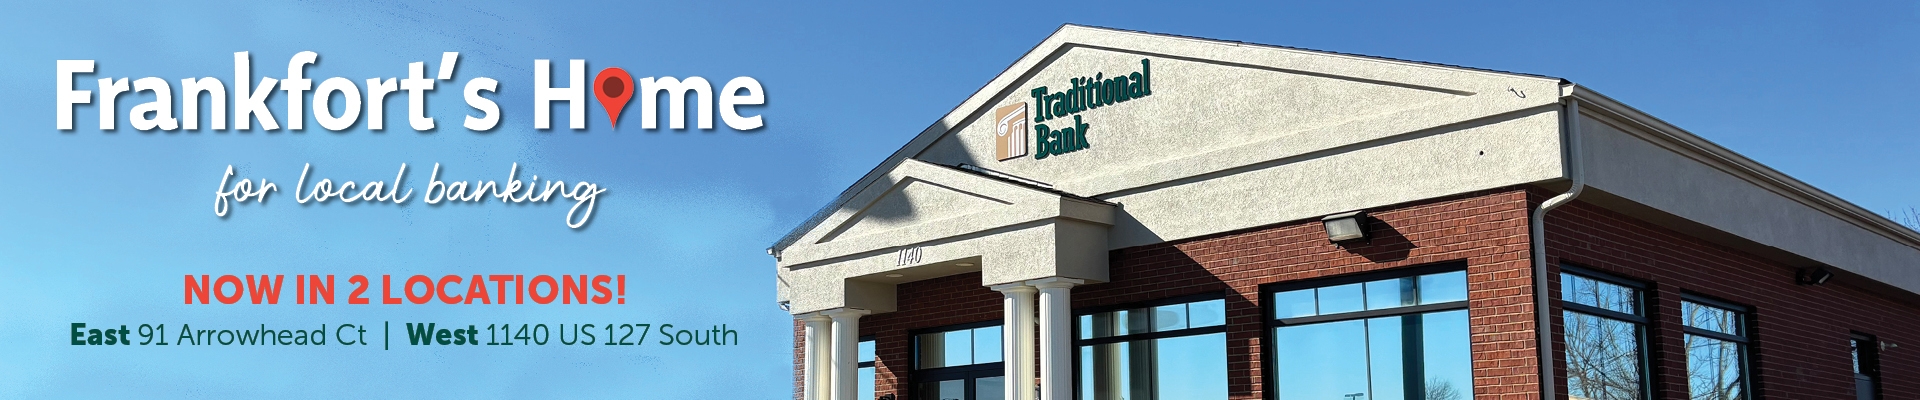 Image of Traditional Bank building: Frankfort's Home for Local Banking- Now in 2 locations - East 91 Arrowhead Court and West 1140 US 127 South Banner